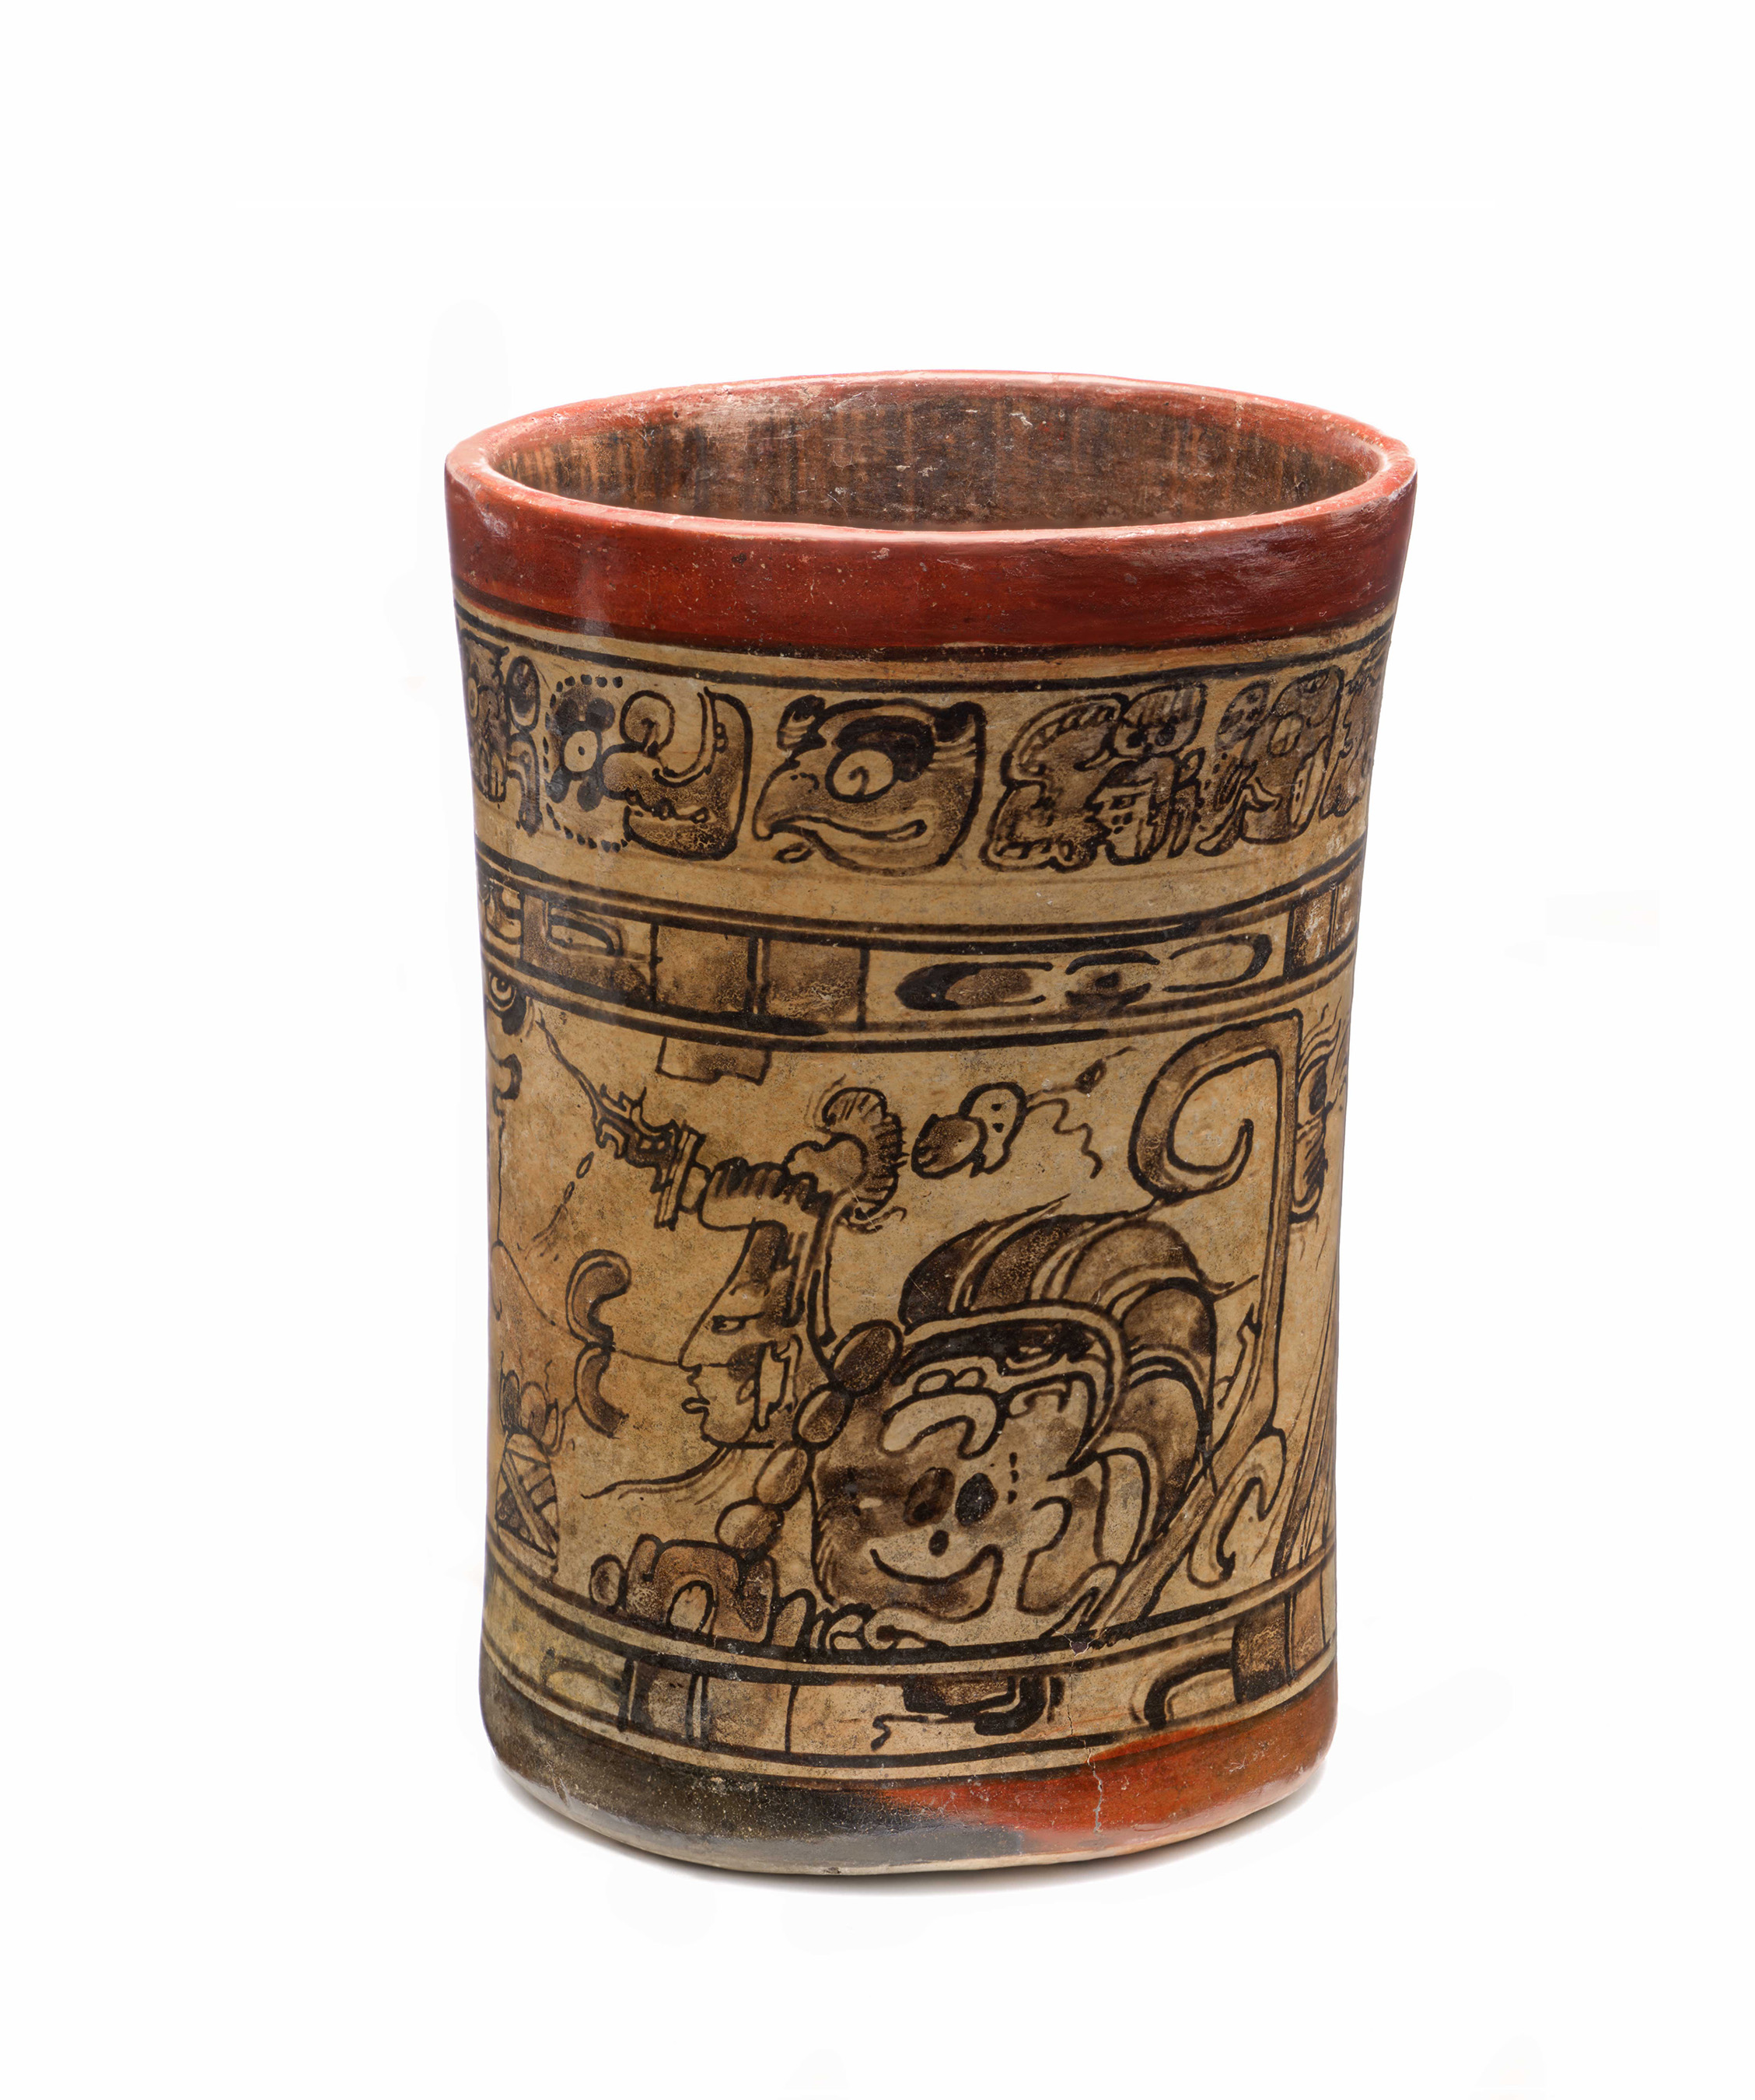 Vessel with Avian Maize God, AD 650-750, Maya, Slip-painted ceramic, Diameter: 3 9/10 in. (9.906 cm); 5 1/2 x 3 7/10 x 3 7/10 in. (13.97 x 9.398 x 9.398 cm), Los Angeles County Museum of Art, Purchased with funds provided by Camilla Chandler Frost (M.2010.115.462) Photo © Museum Associates/ LACMA